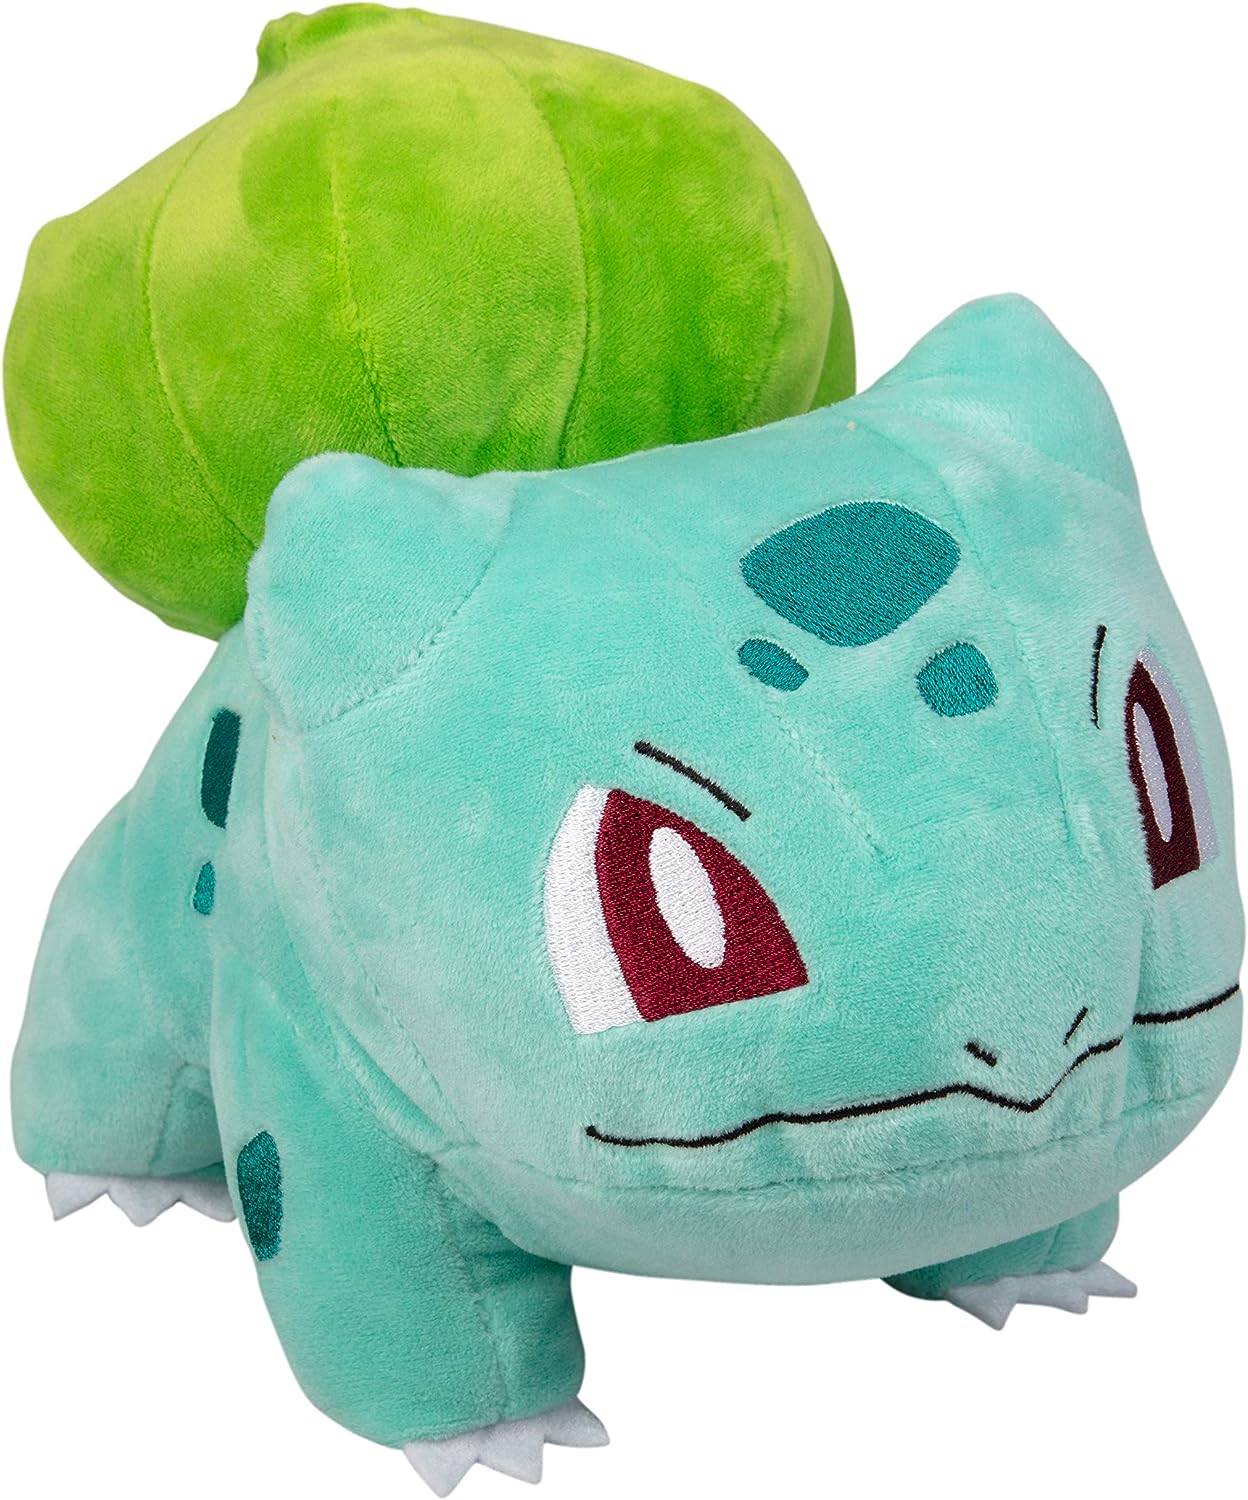 Pokémon 8" Bulbasaur Plush Stuffed Animal Toy - Officially Licensed - Quality Soft Stuffed Animal Toy - Generation 1 Starter - Gift for Kids & Fans of Pokemon - with Unique Velvet Fabric and Authentic Details